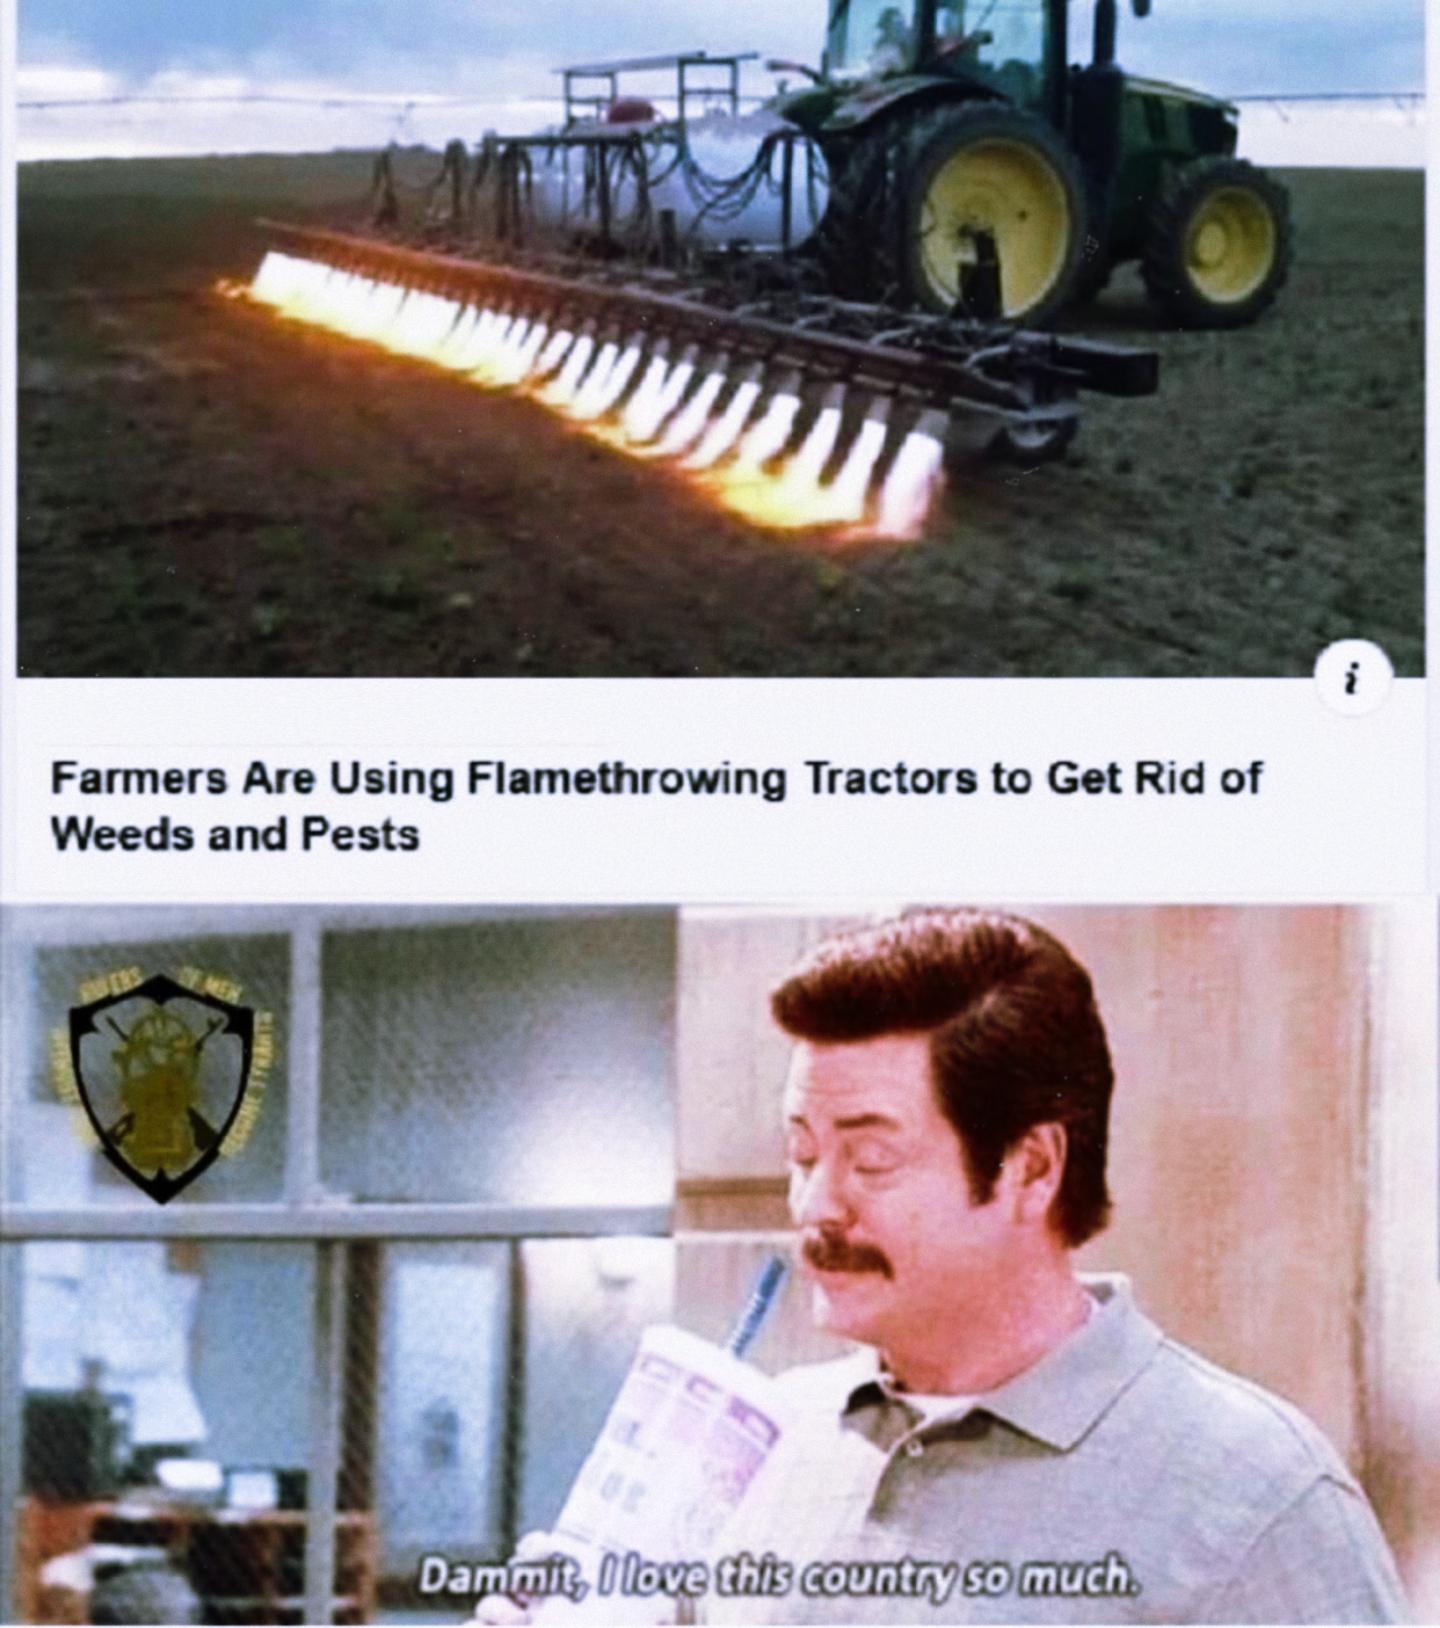 dank memes - burglar memes - i Farmers Are Using Flamethrowing Tractors to Get Rid of Weeds and Pests Dammit, I love this country so much